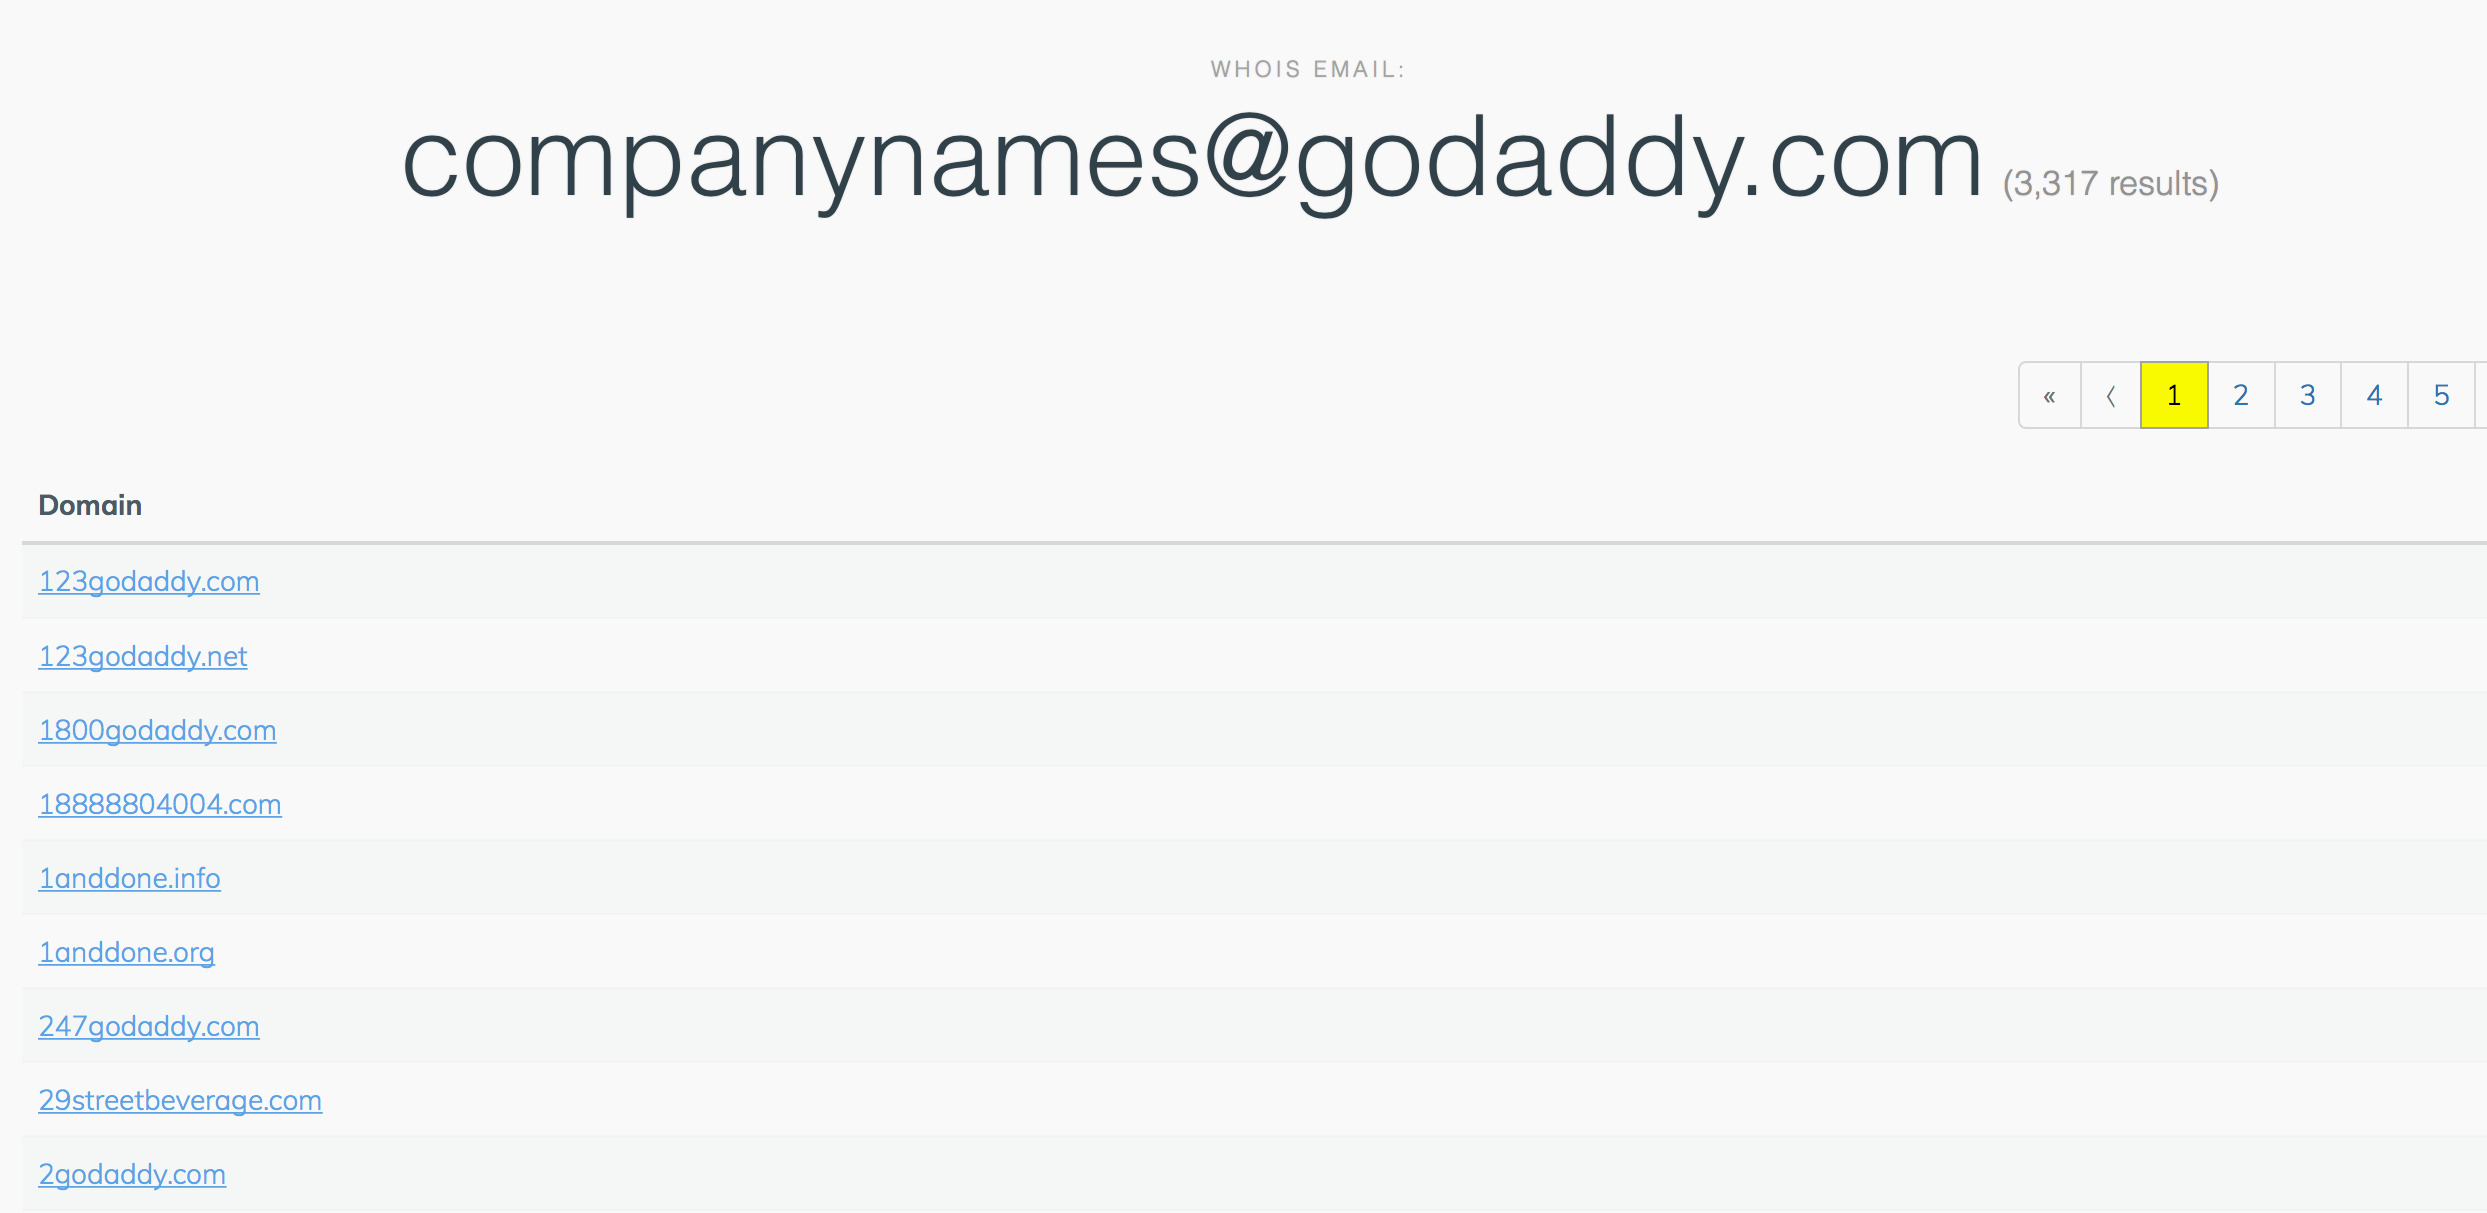 All domain names by the same owner